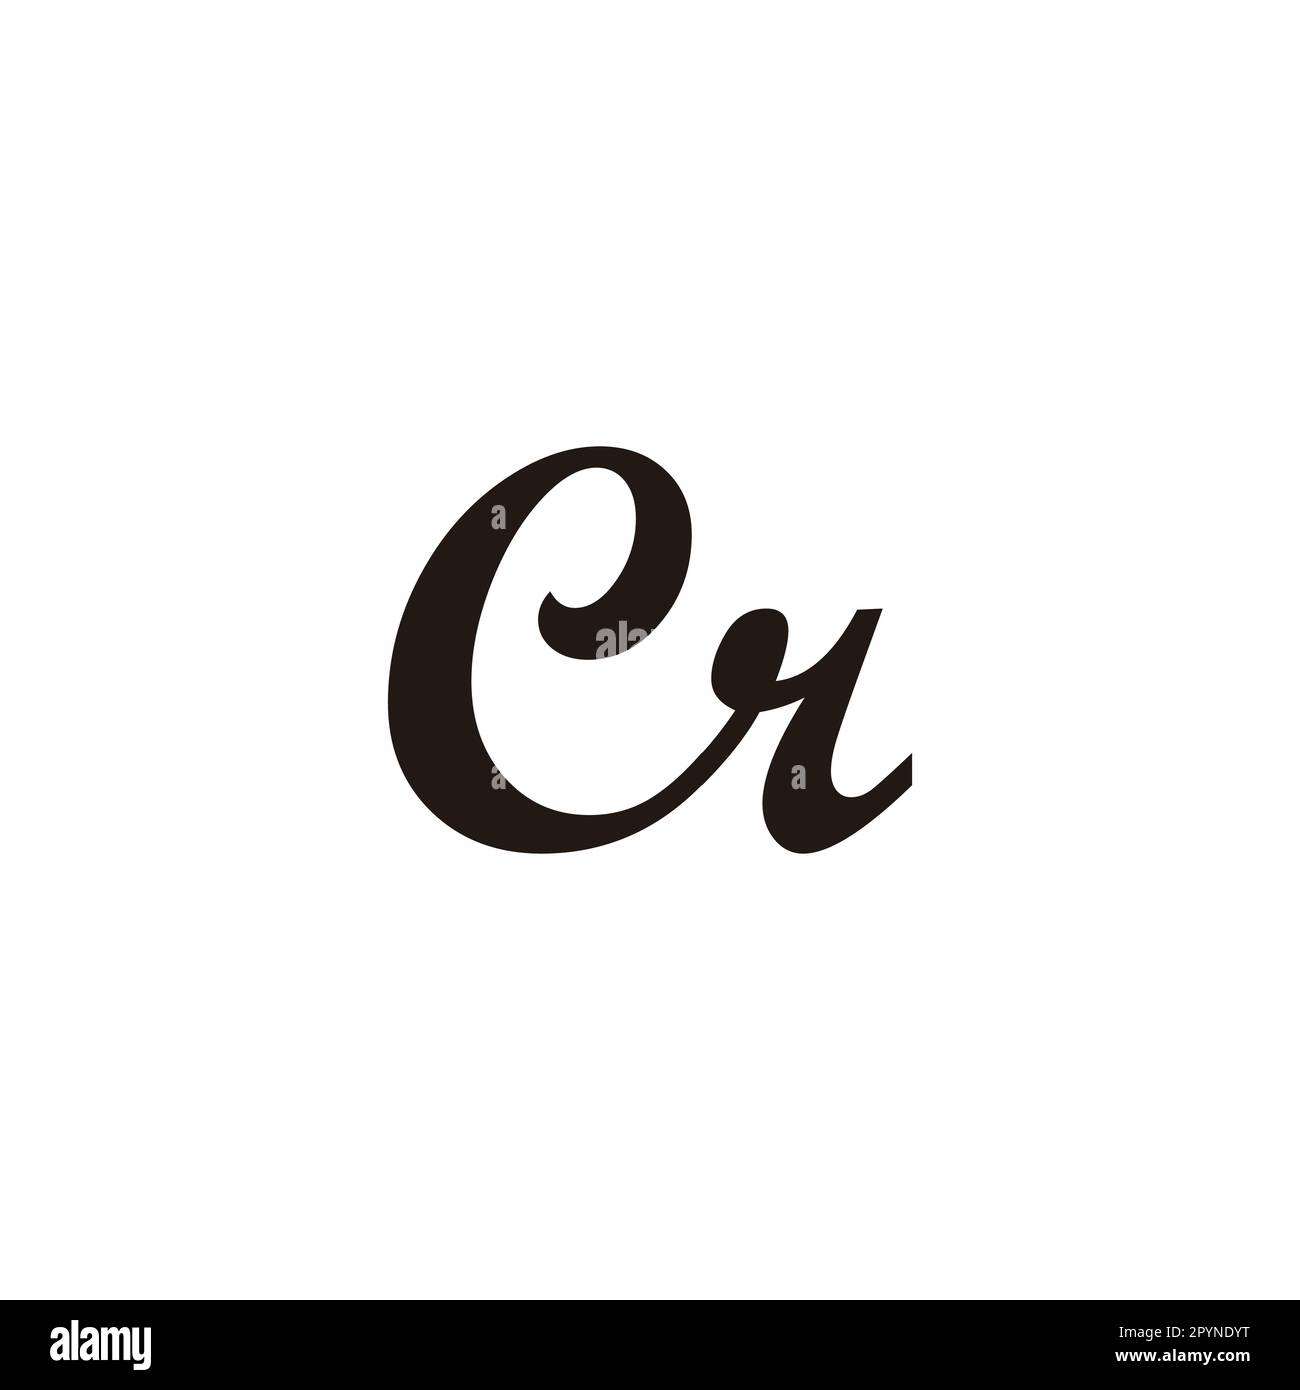 Letter Cr connect geometric symbol simple logo vector Stock Vector